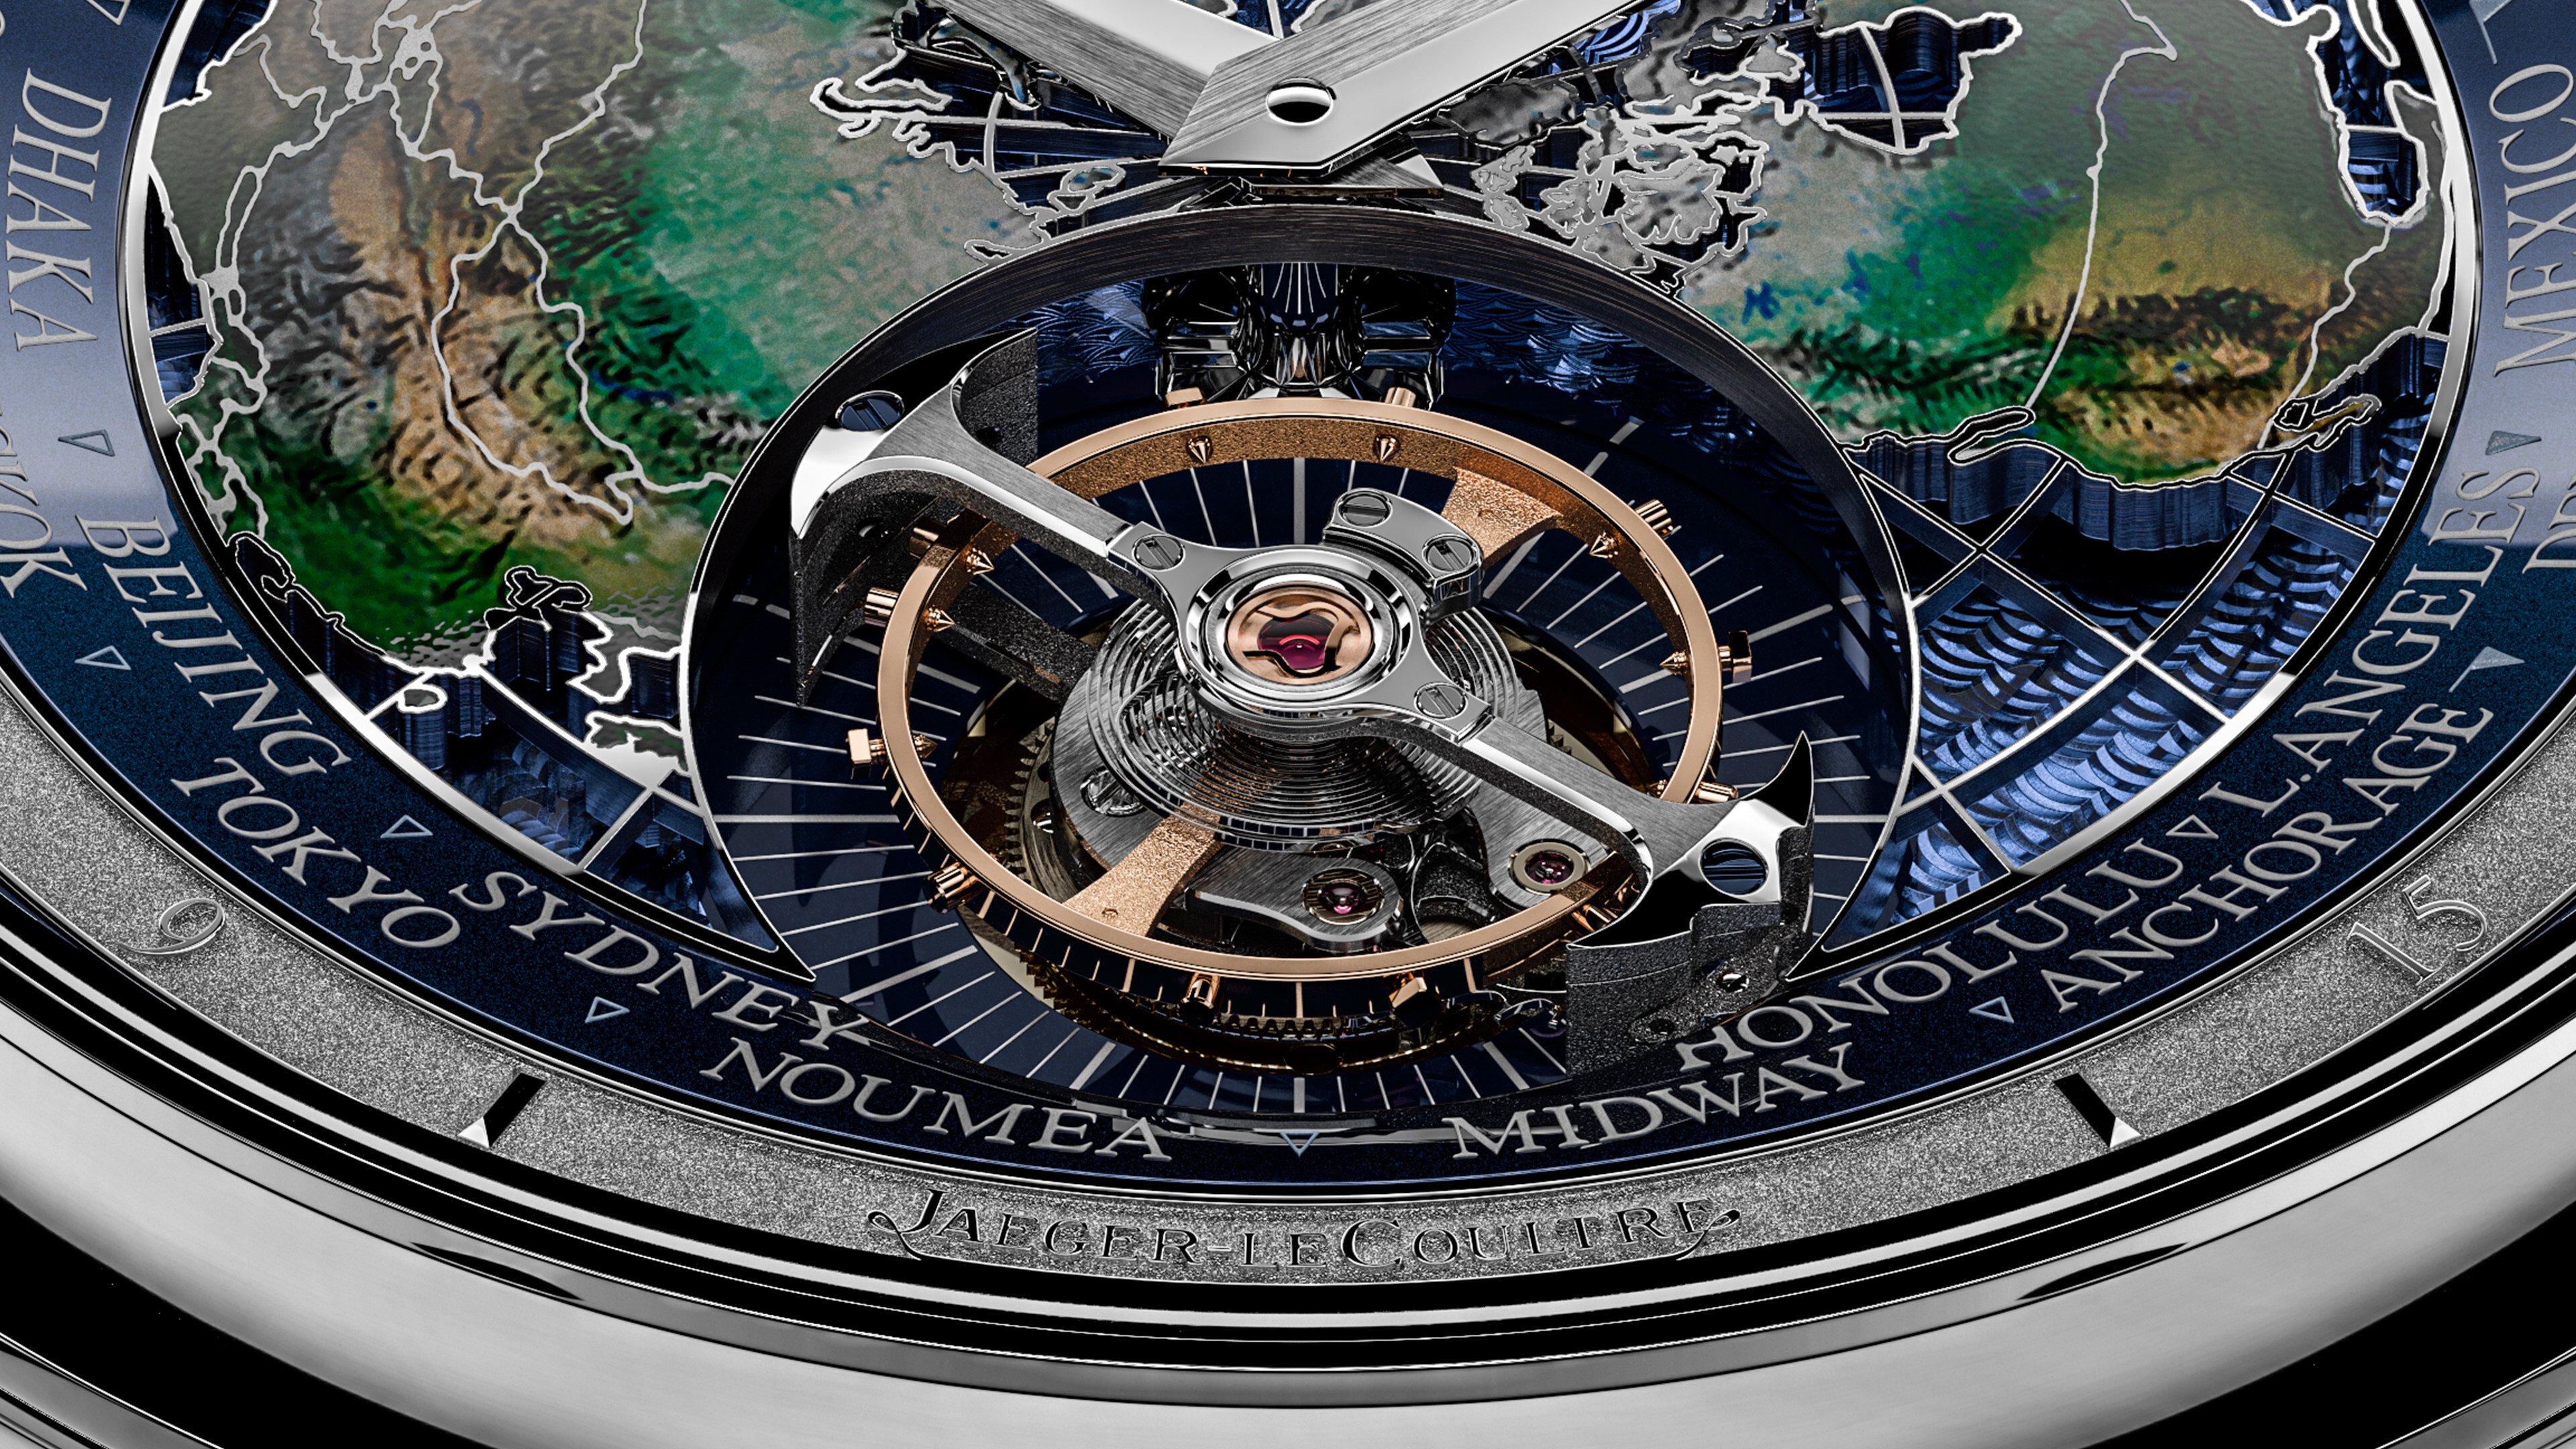 Jaeger-LeCoultre’s Master Grande Tradition Calibre 948 combines a world-time complication with a flying tourbillon in a breathtakingly beautiful watch. Photo: Jaeger-LeCoultre